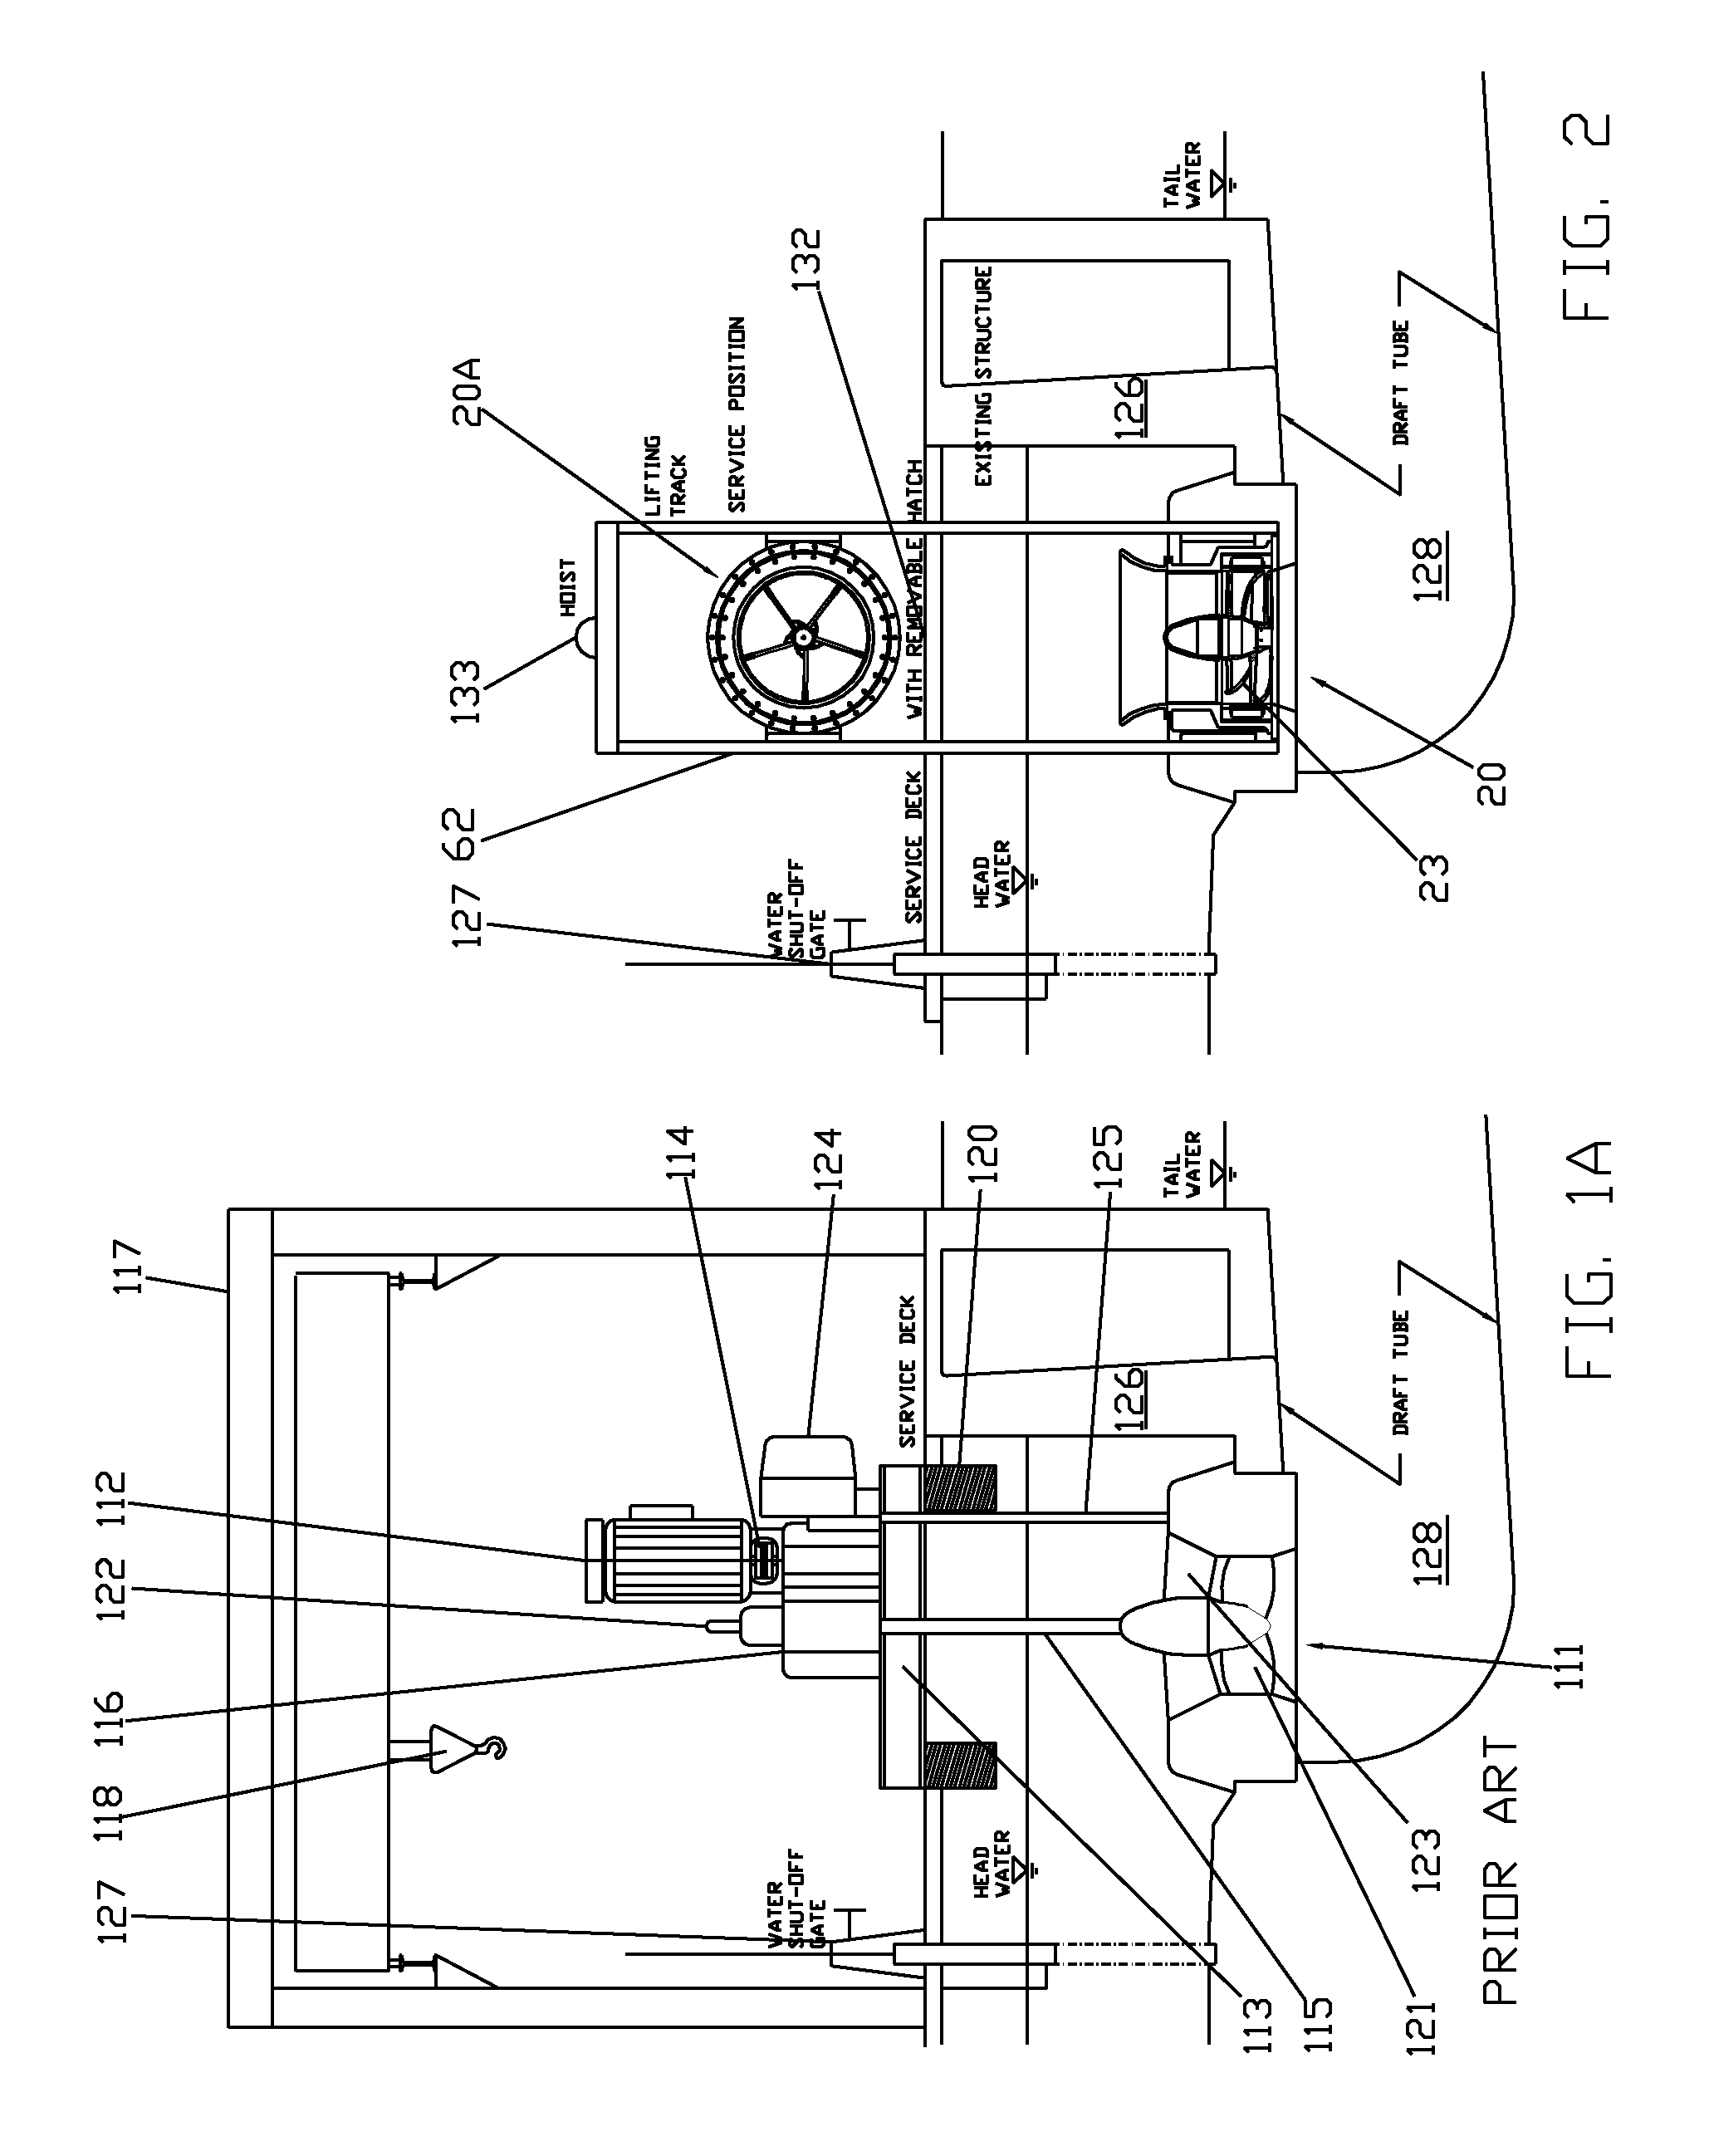 Power conversion and energy storage device